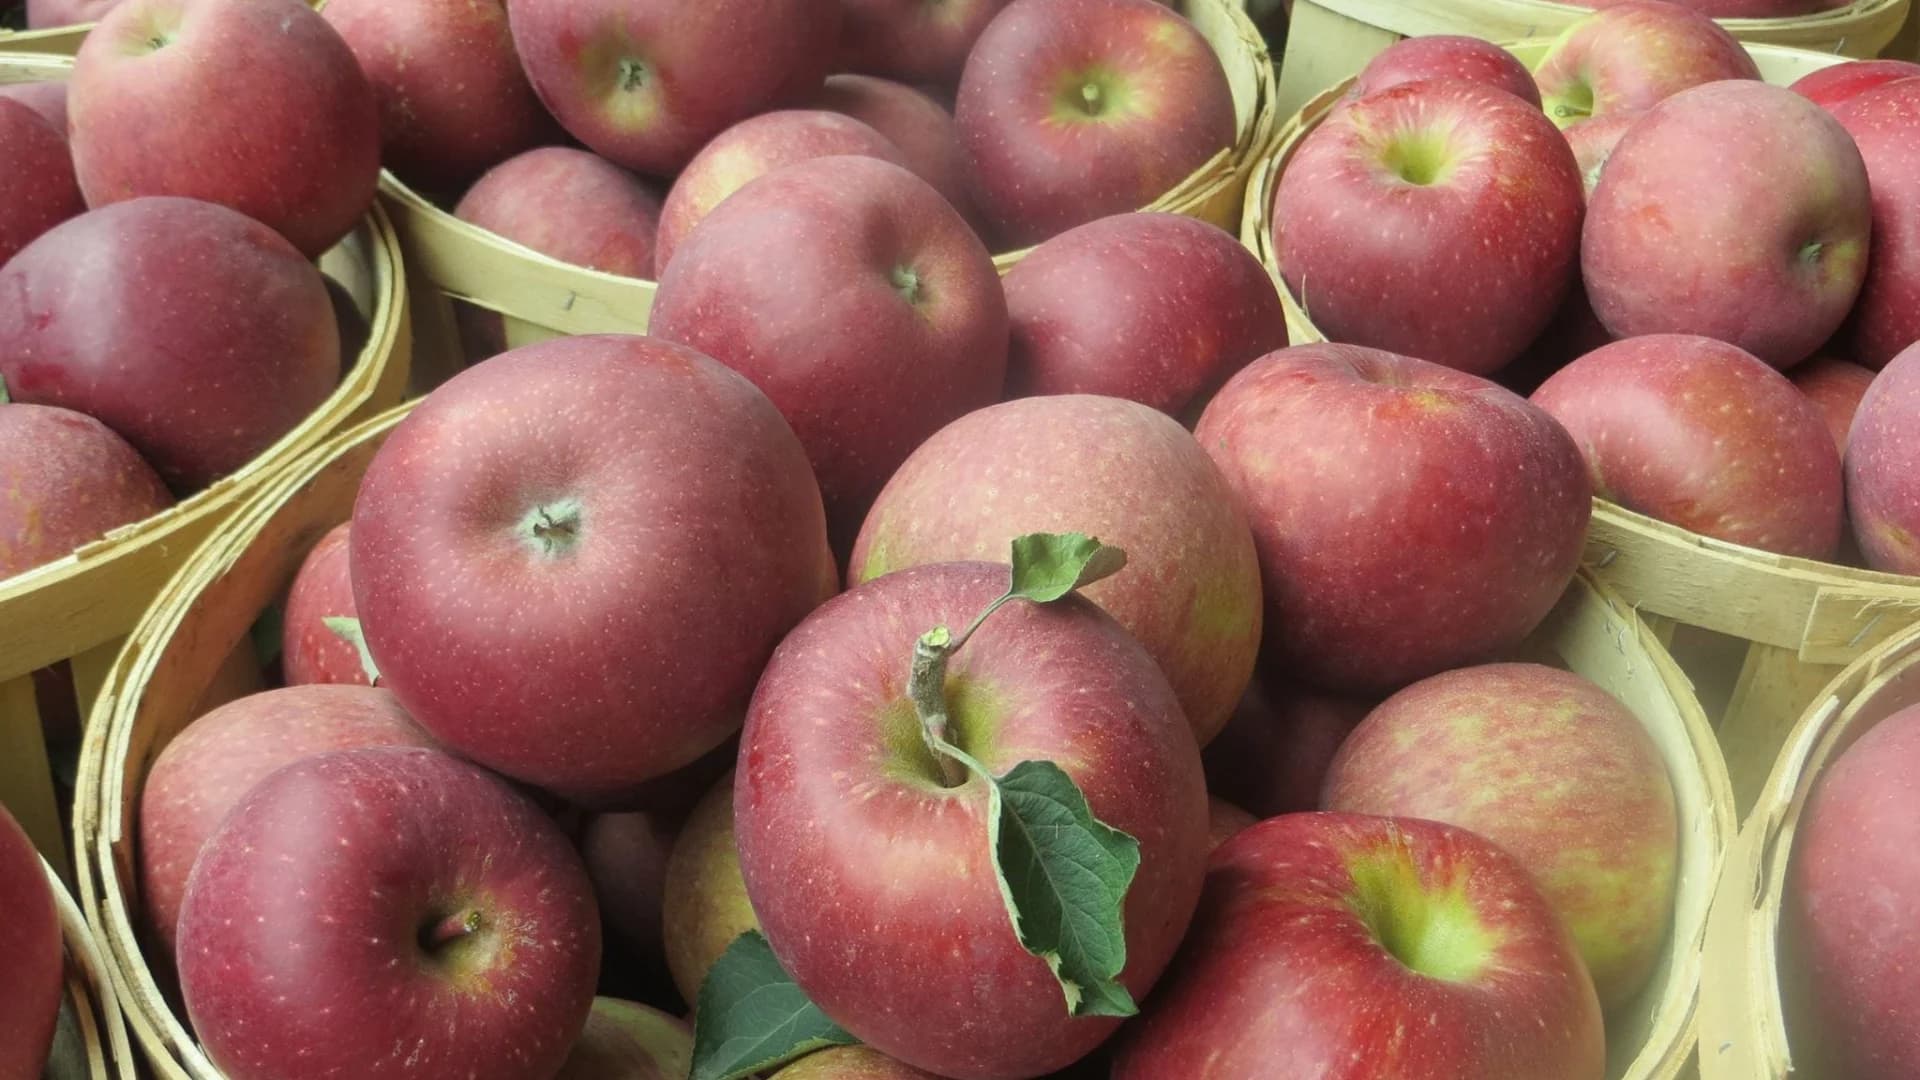 Guide: Apple Picking in New Jersey